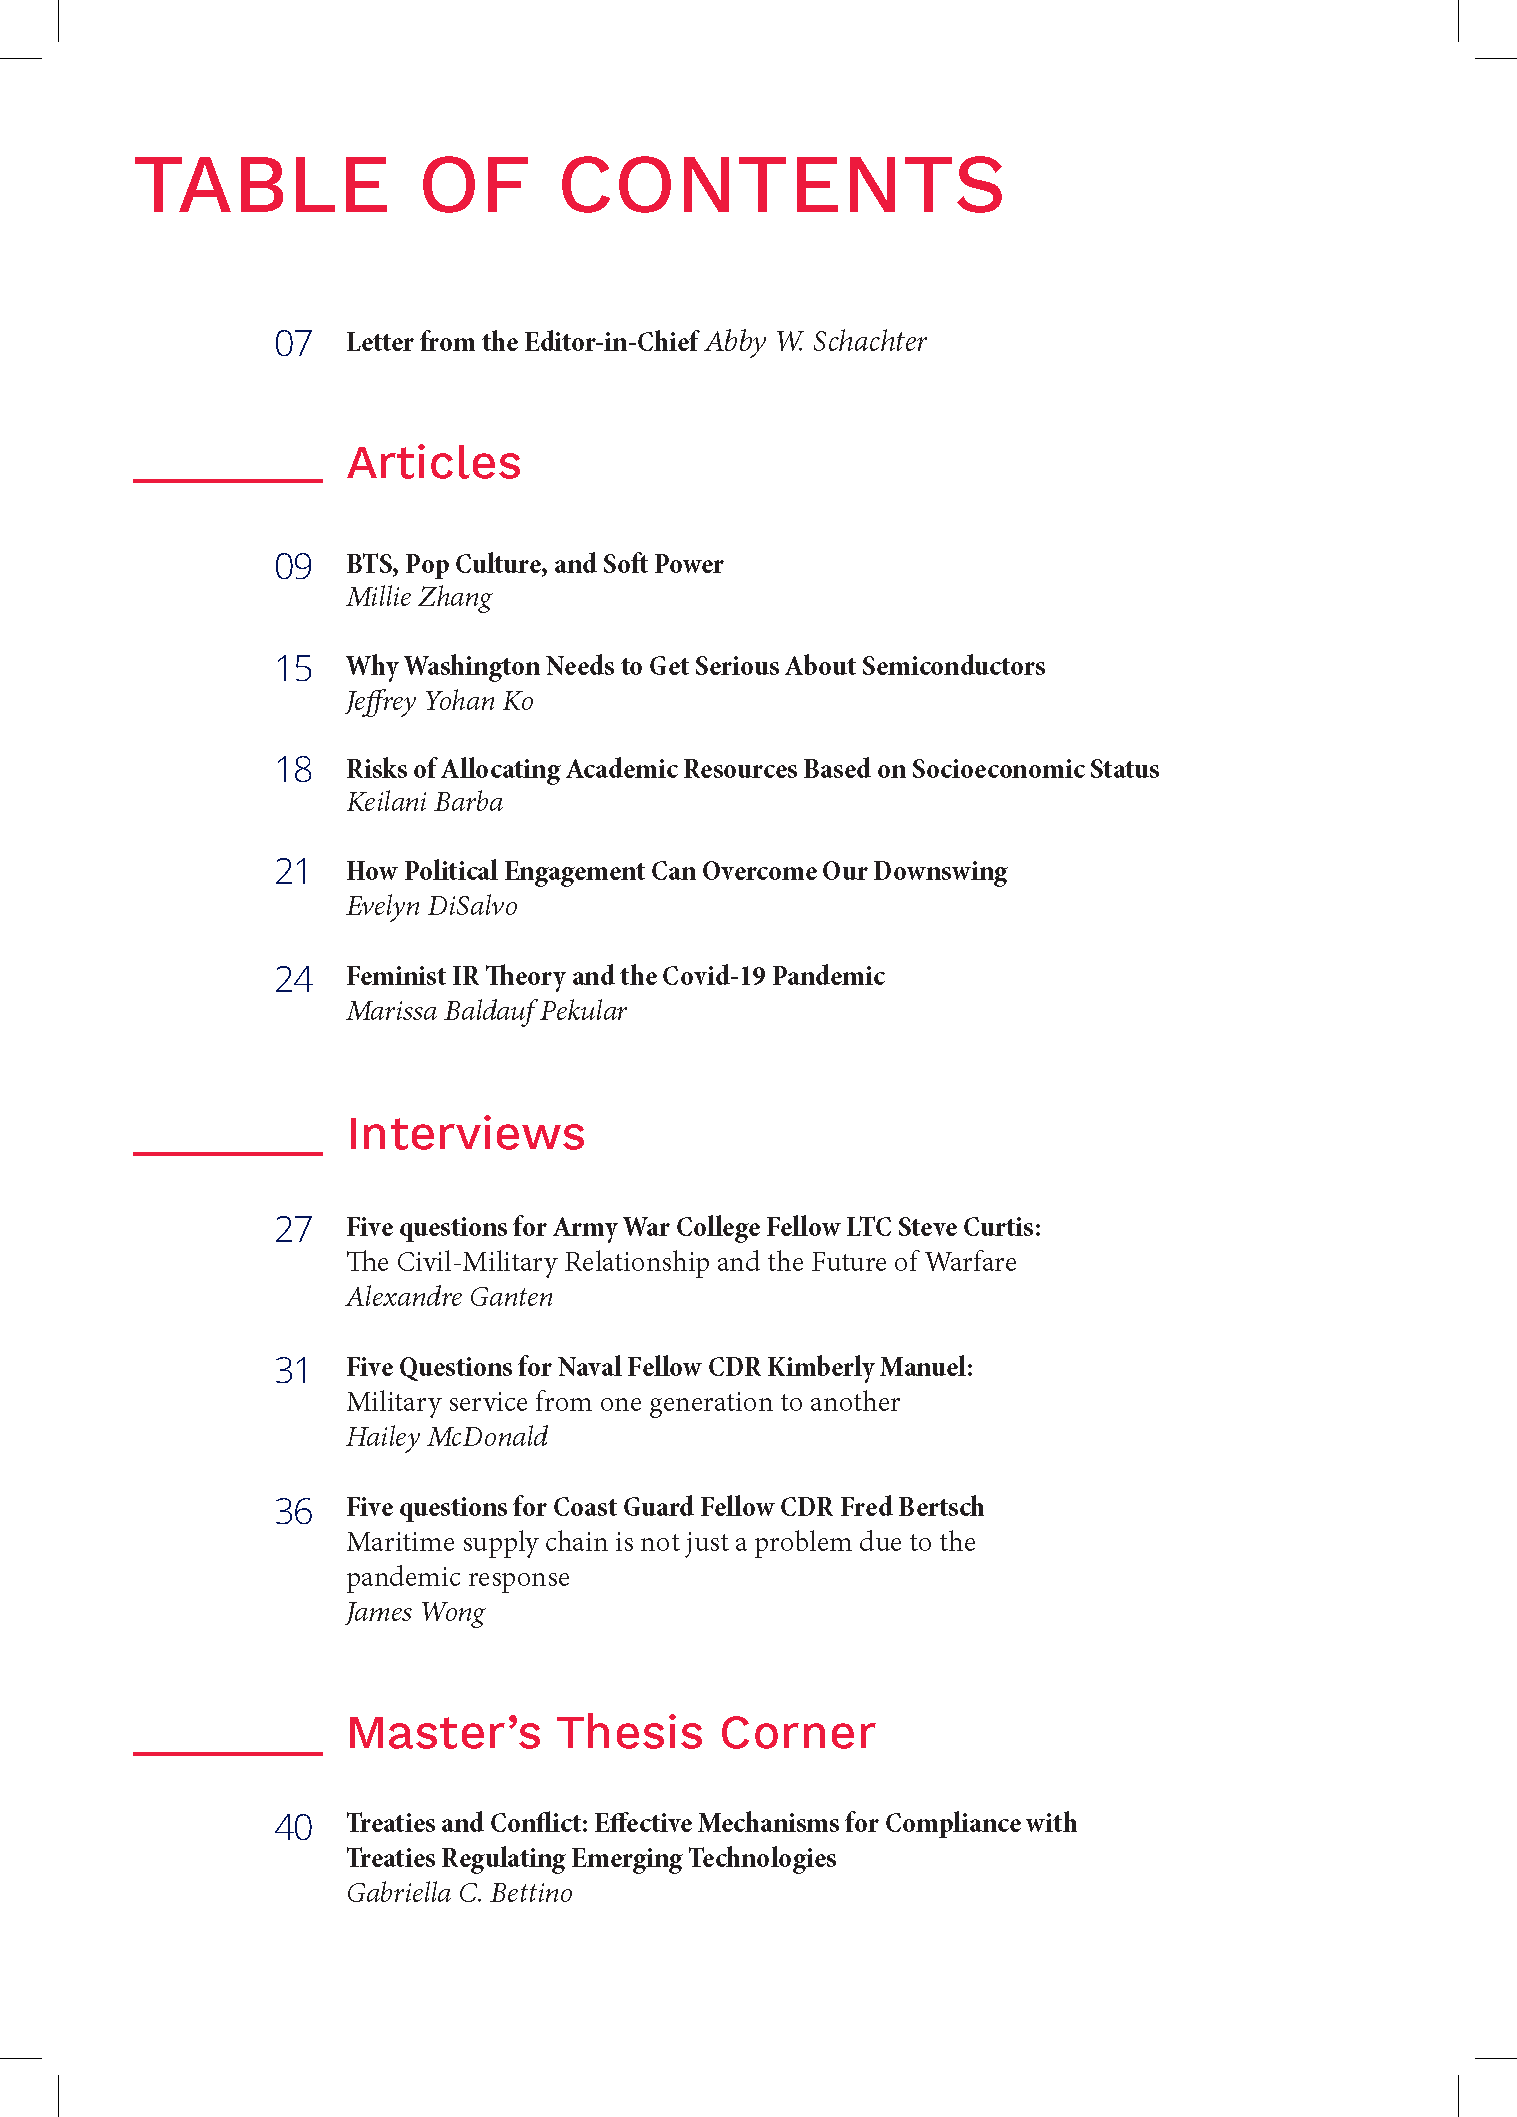 toc-jps_2022_vol6_issue2_spring_final-12.png